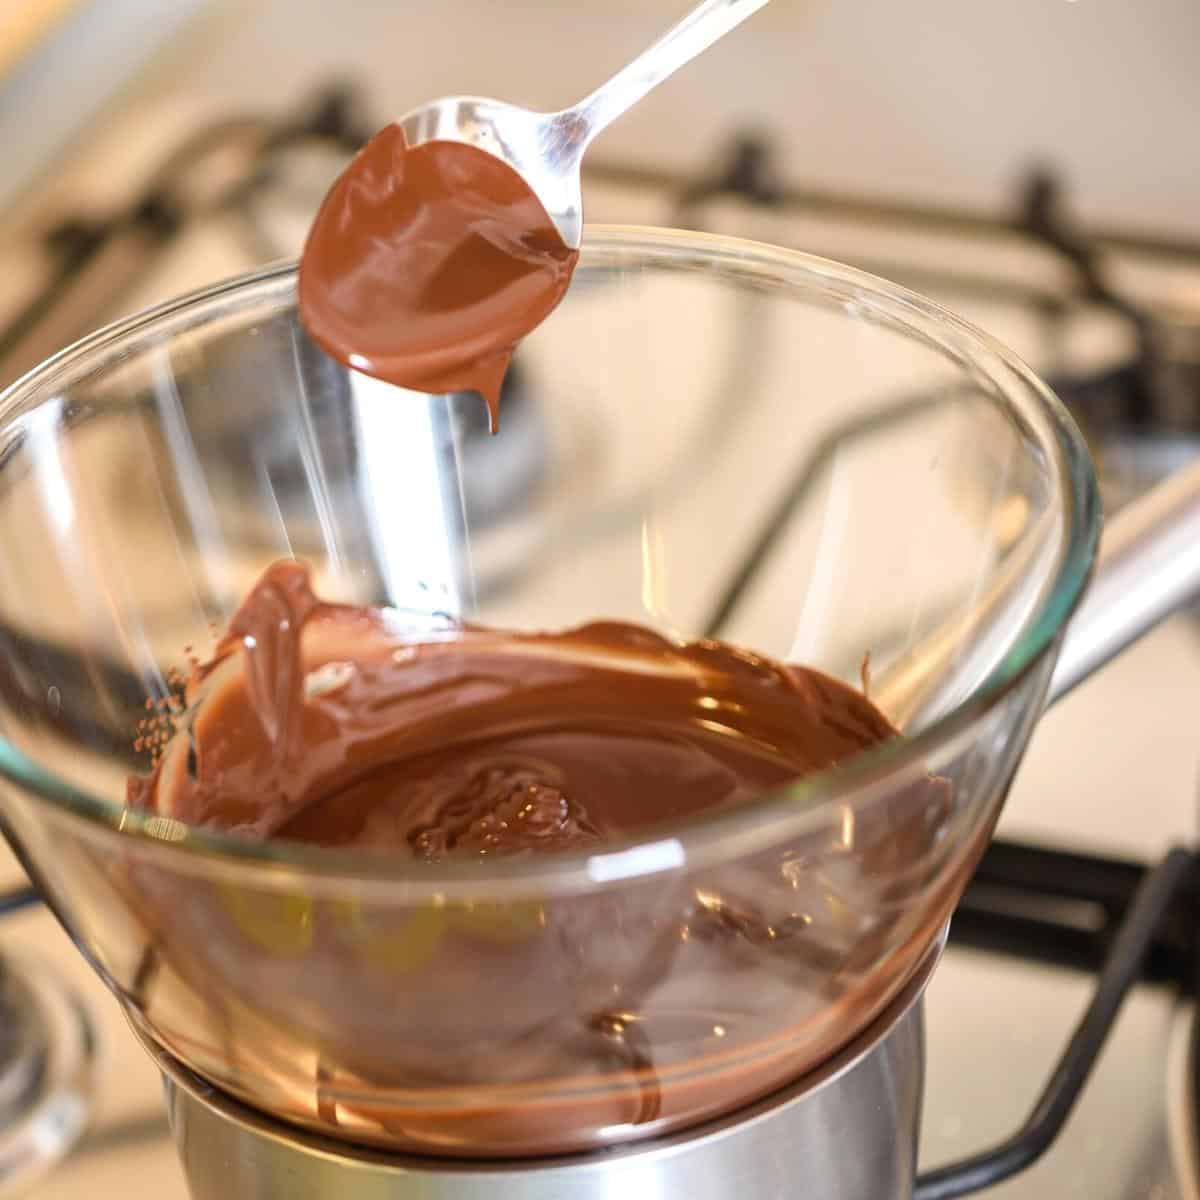 Melting chocolate in the double boiler.